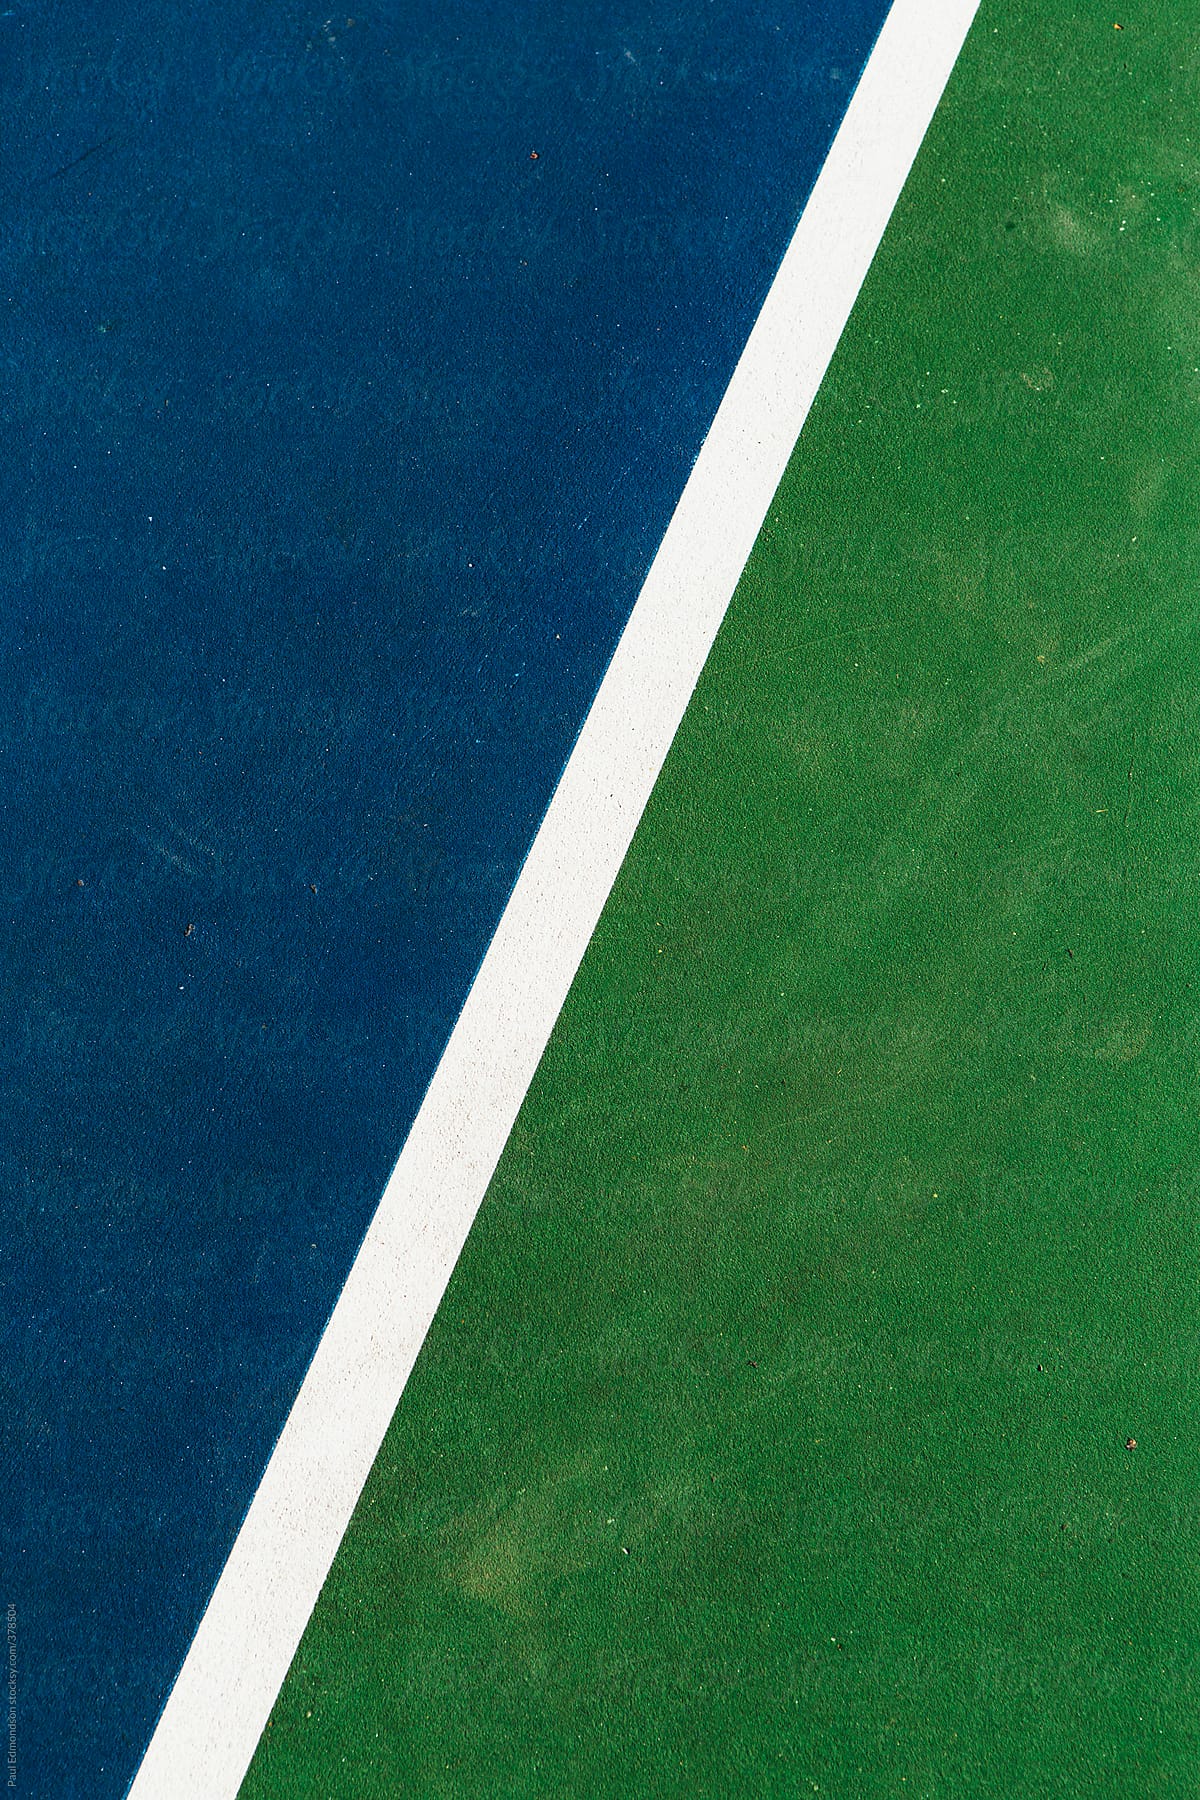 Lines on basketball court, close up